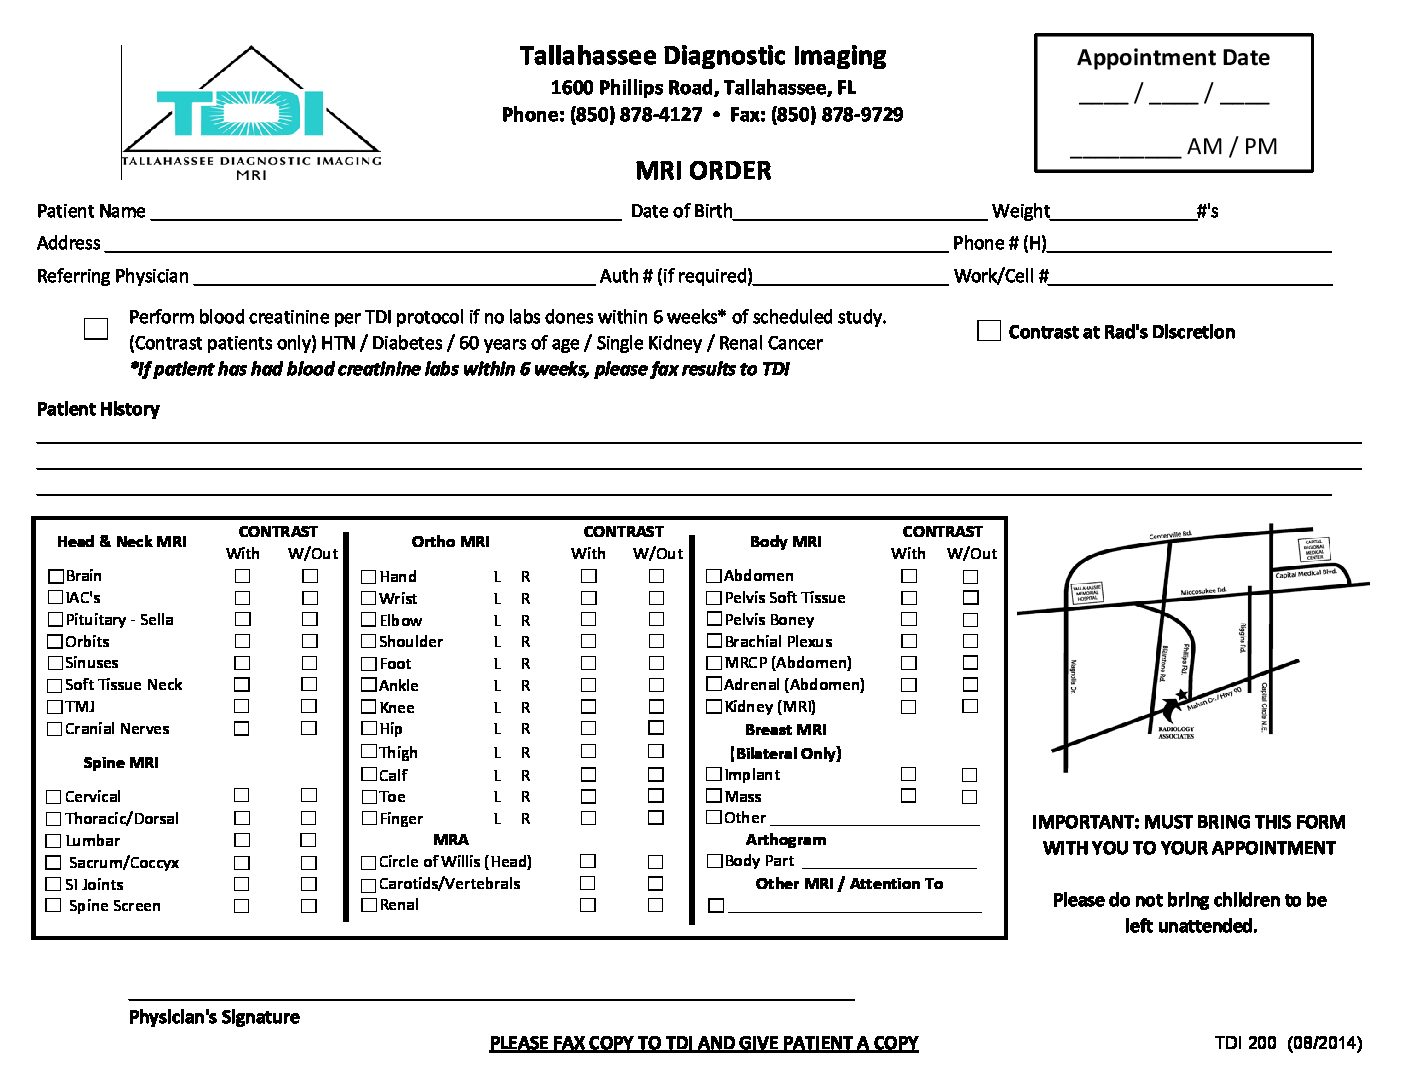 Exam Request Form - Radiology Associates of Tallahassee